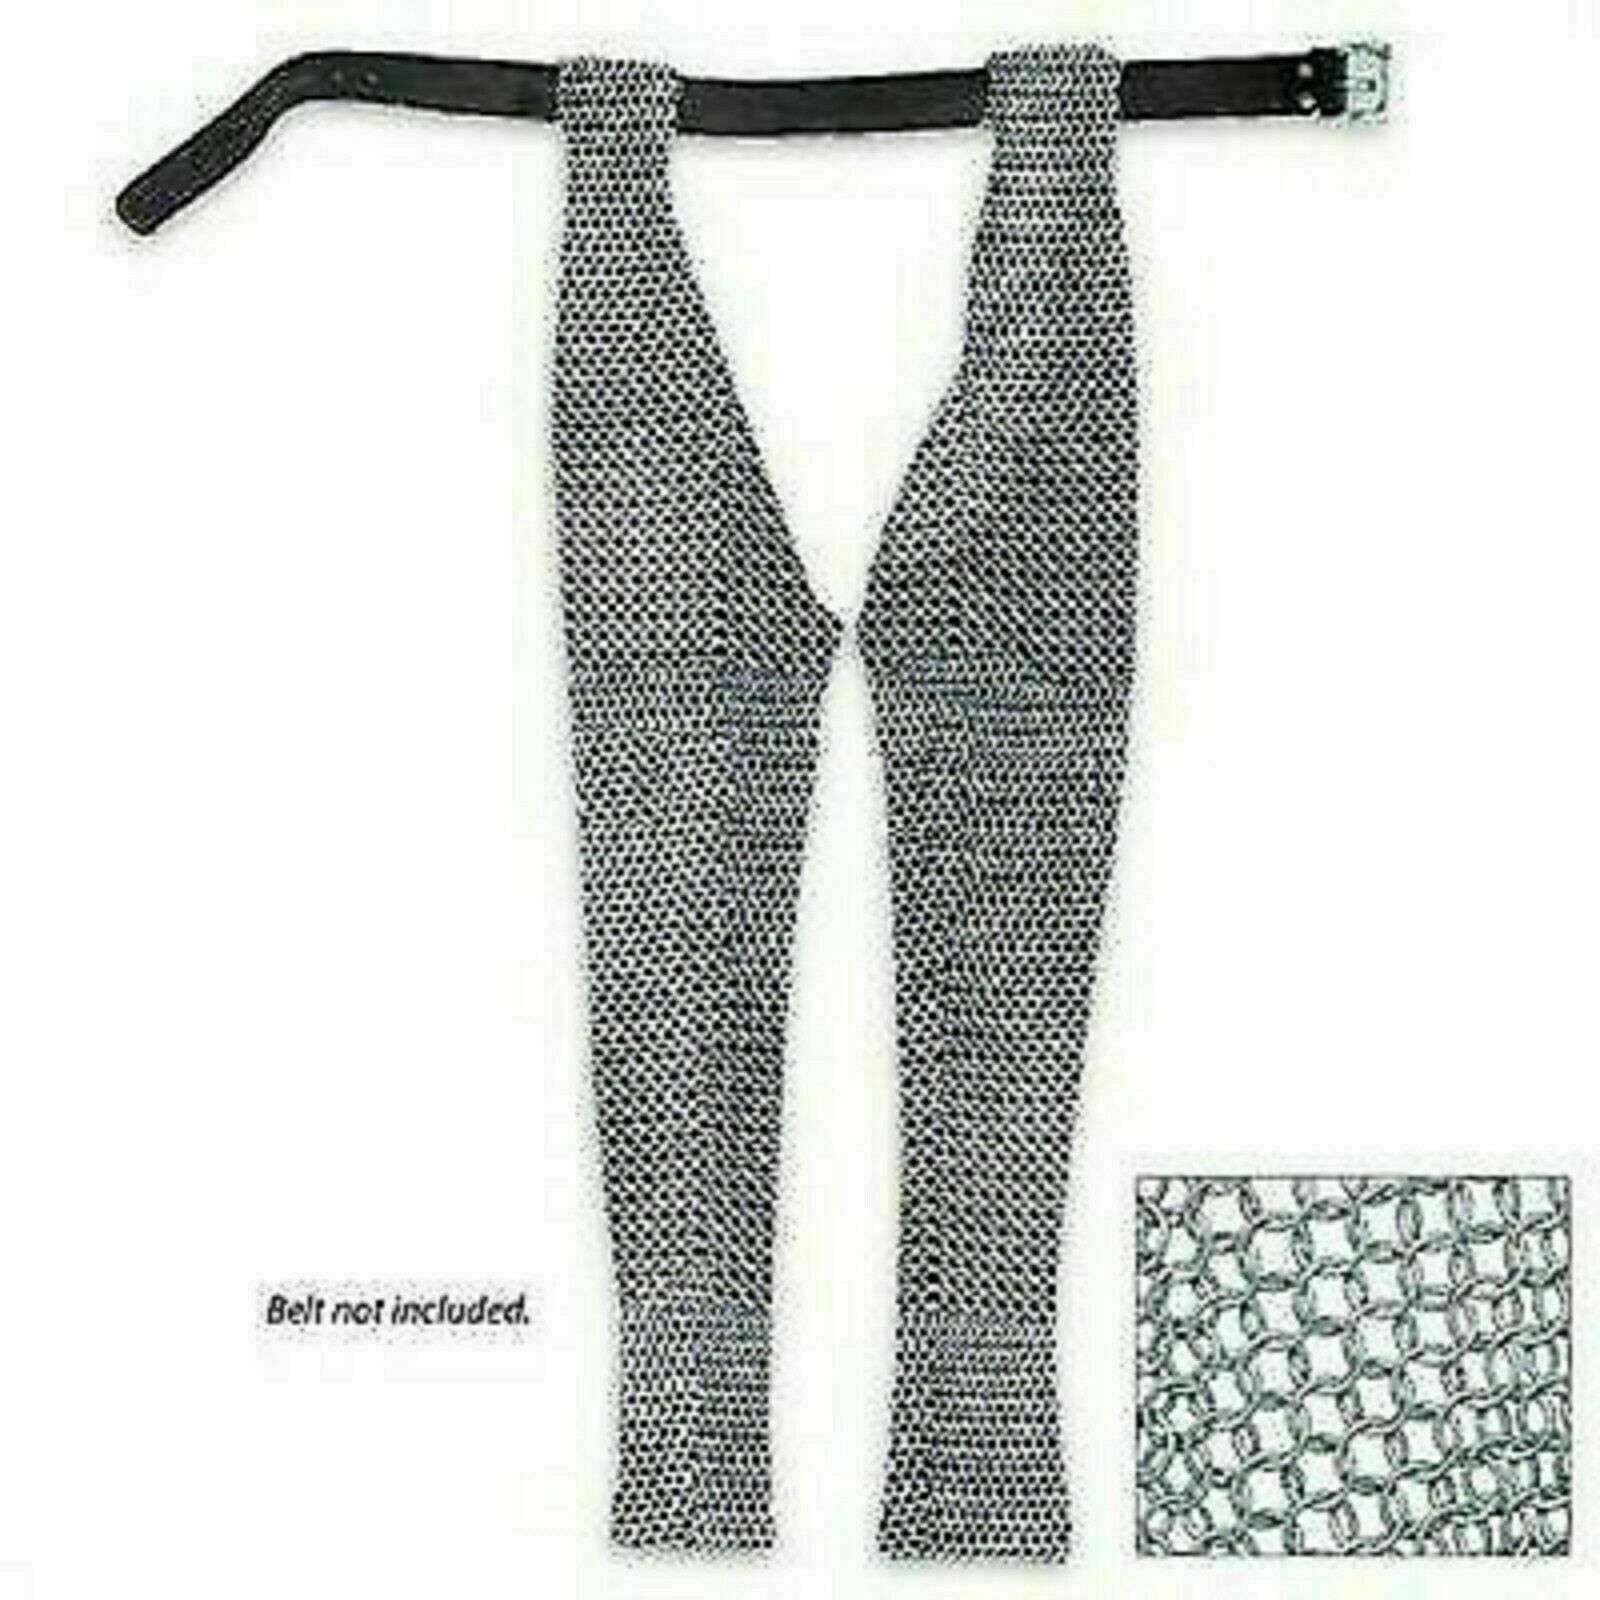 DGH® Medieval Battle Ready Chausses Chain Mail Leggings Best Gifting Item